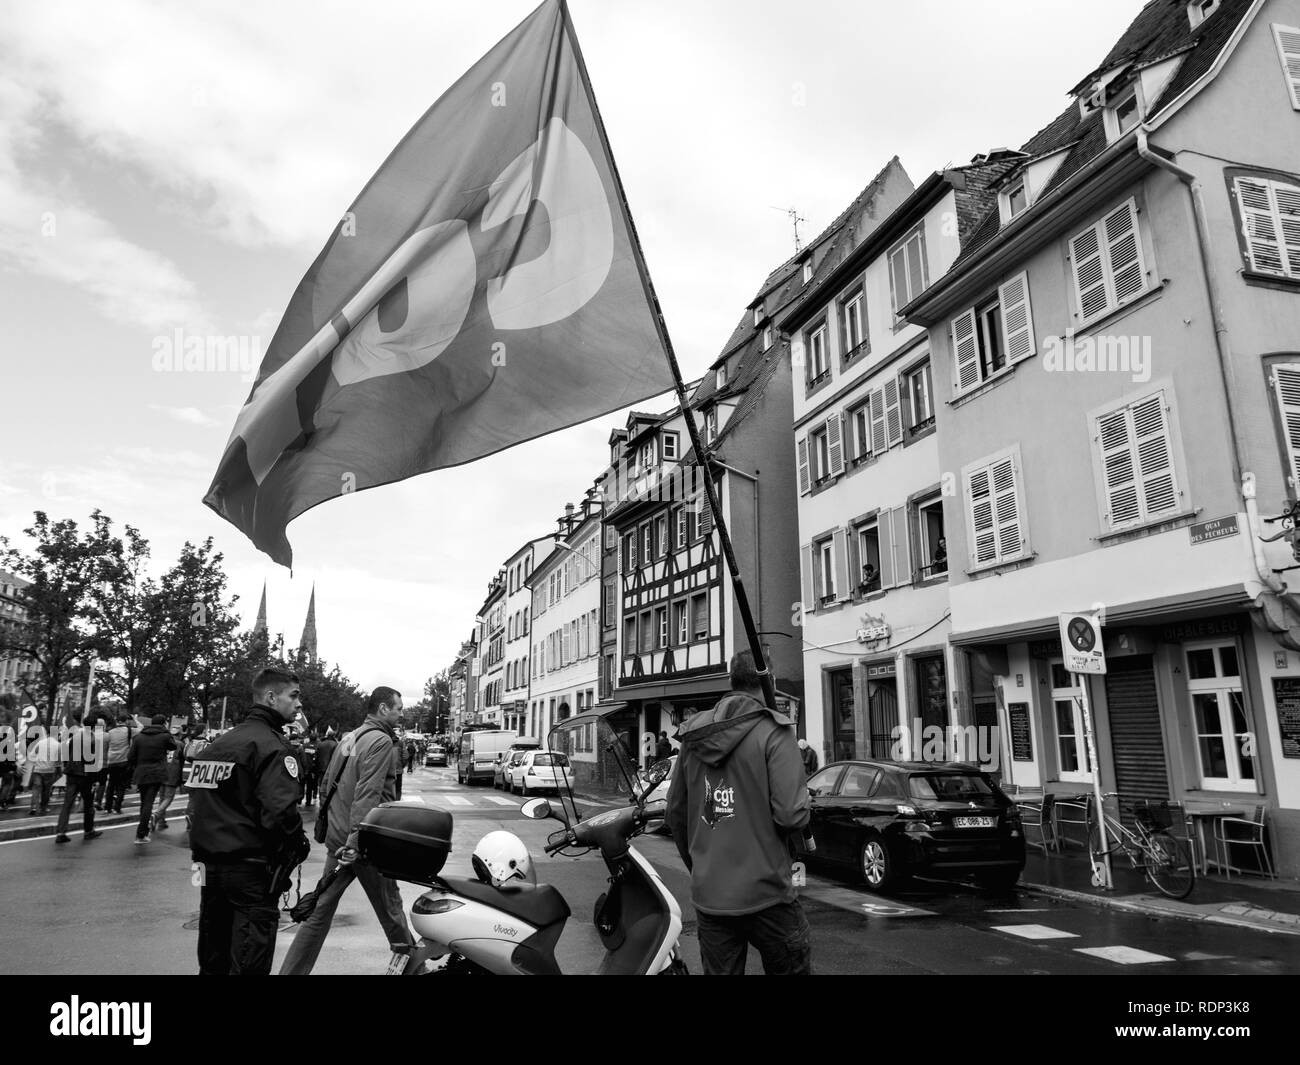 STRASBOURG, FRANCE - SEP 12, 2018: Man with CGT flag on street during a French Nationwide day of protest against labor reform proposed by Emmanuel Macron Government - black and white  Stock Photo